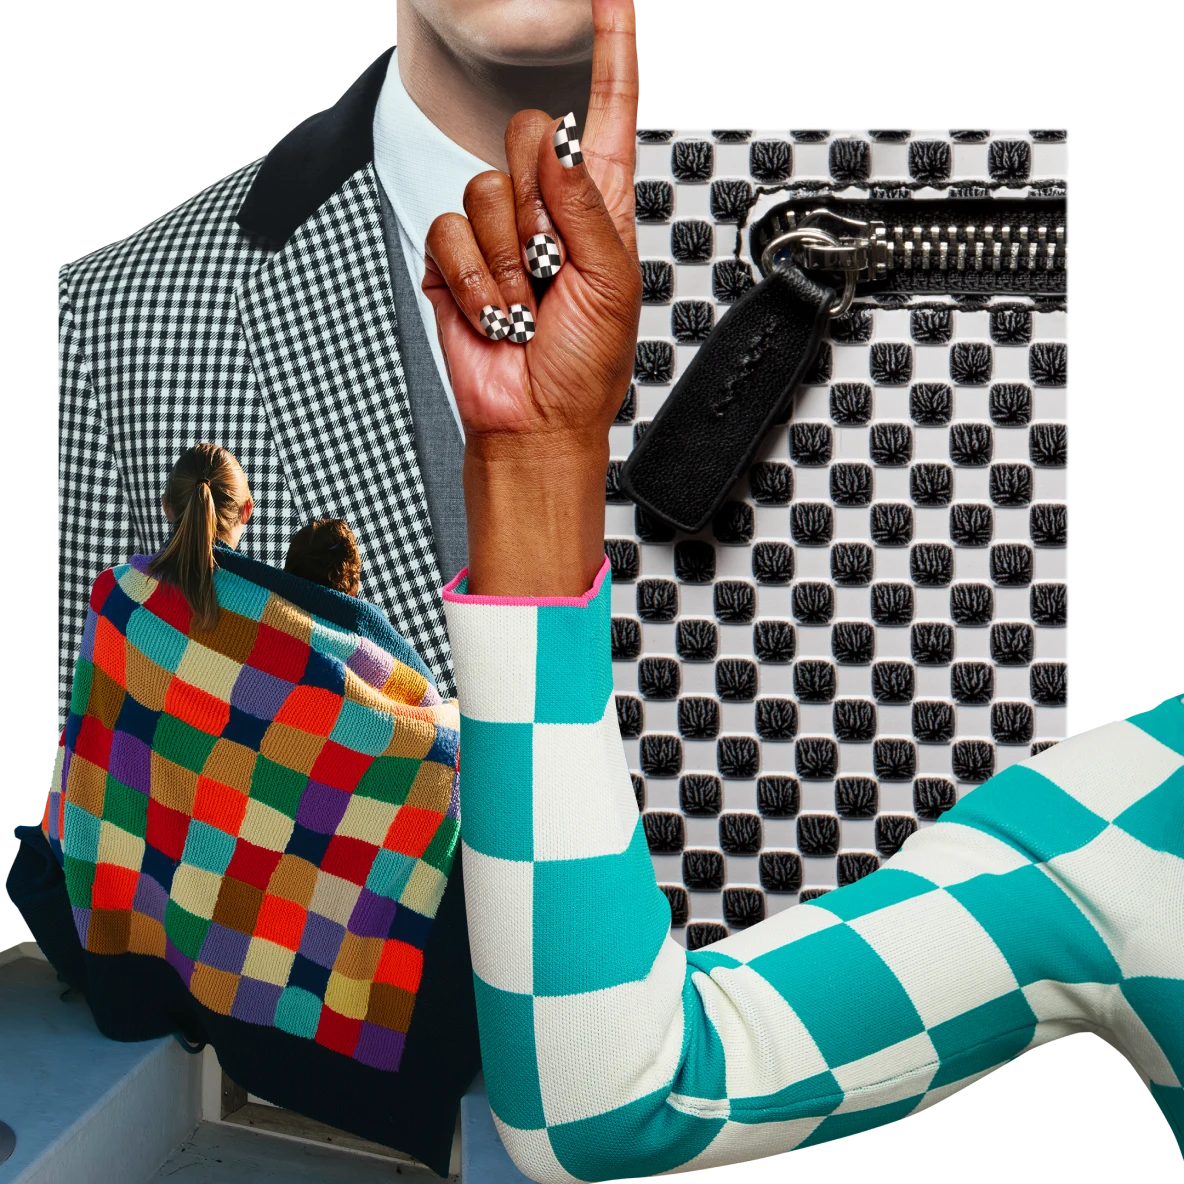 Black woman’s hand with black and white checkered nails, index finger raised in a number one, arm in long-sleeved green and white checkered shirt. Black and white checkered wallet. Man in checkered suit with black collar.